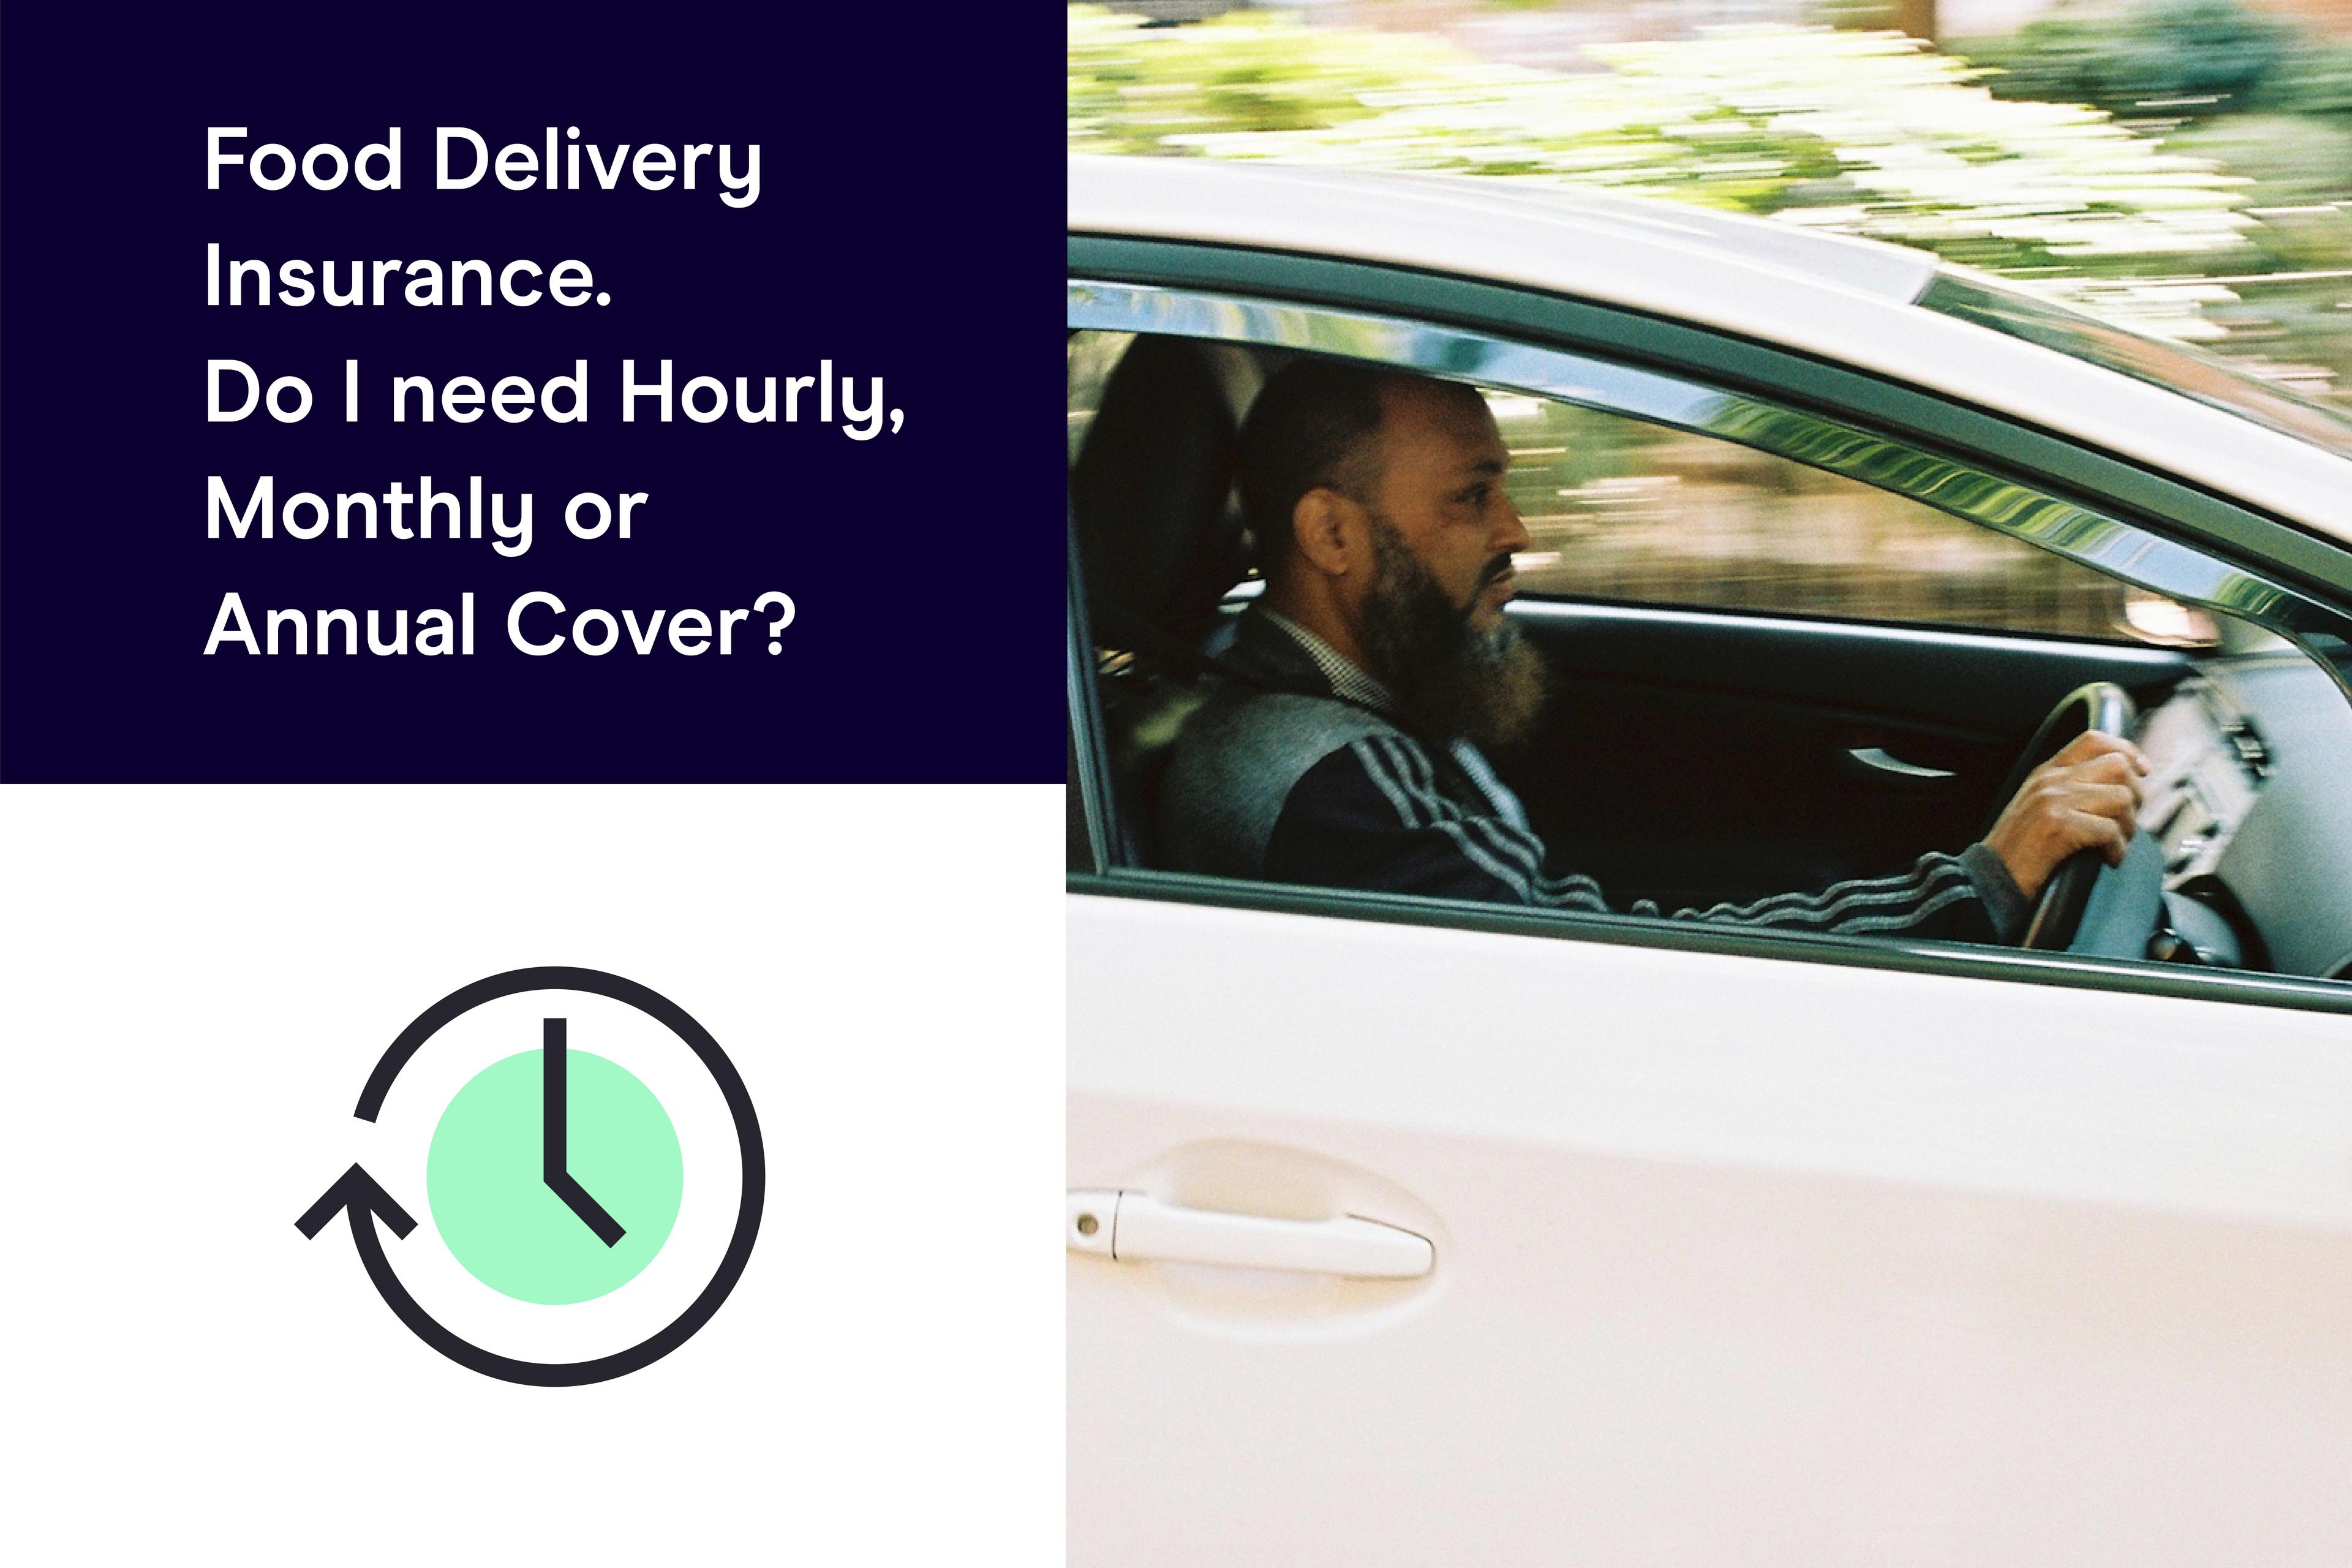 do i need hourly monthly or annual food delivery insurance